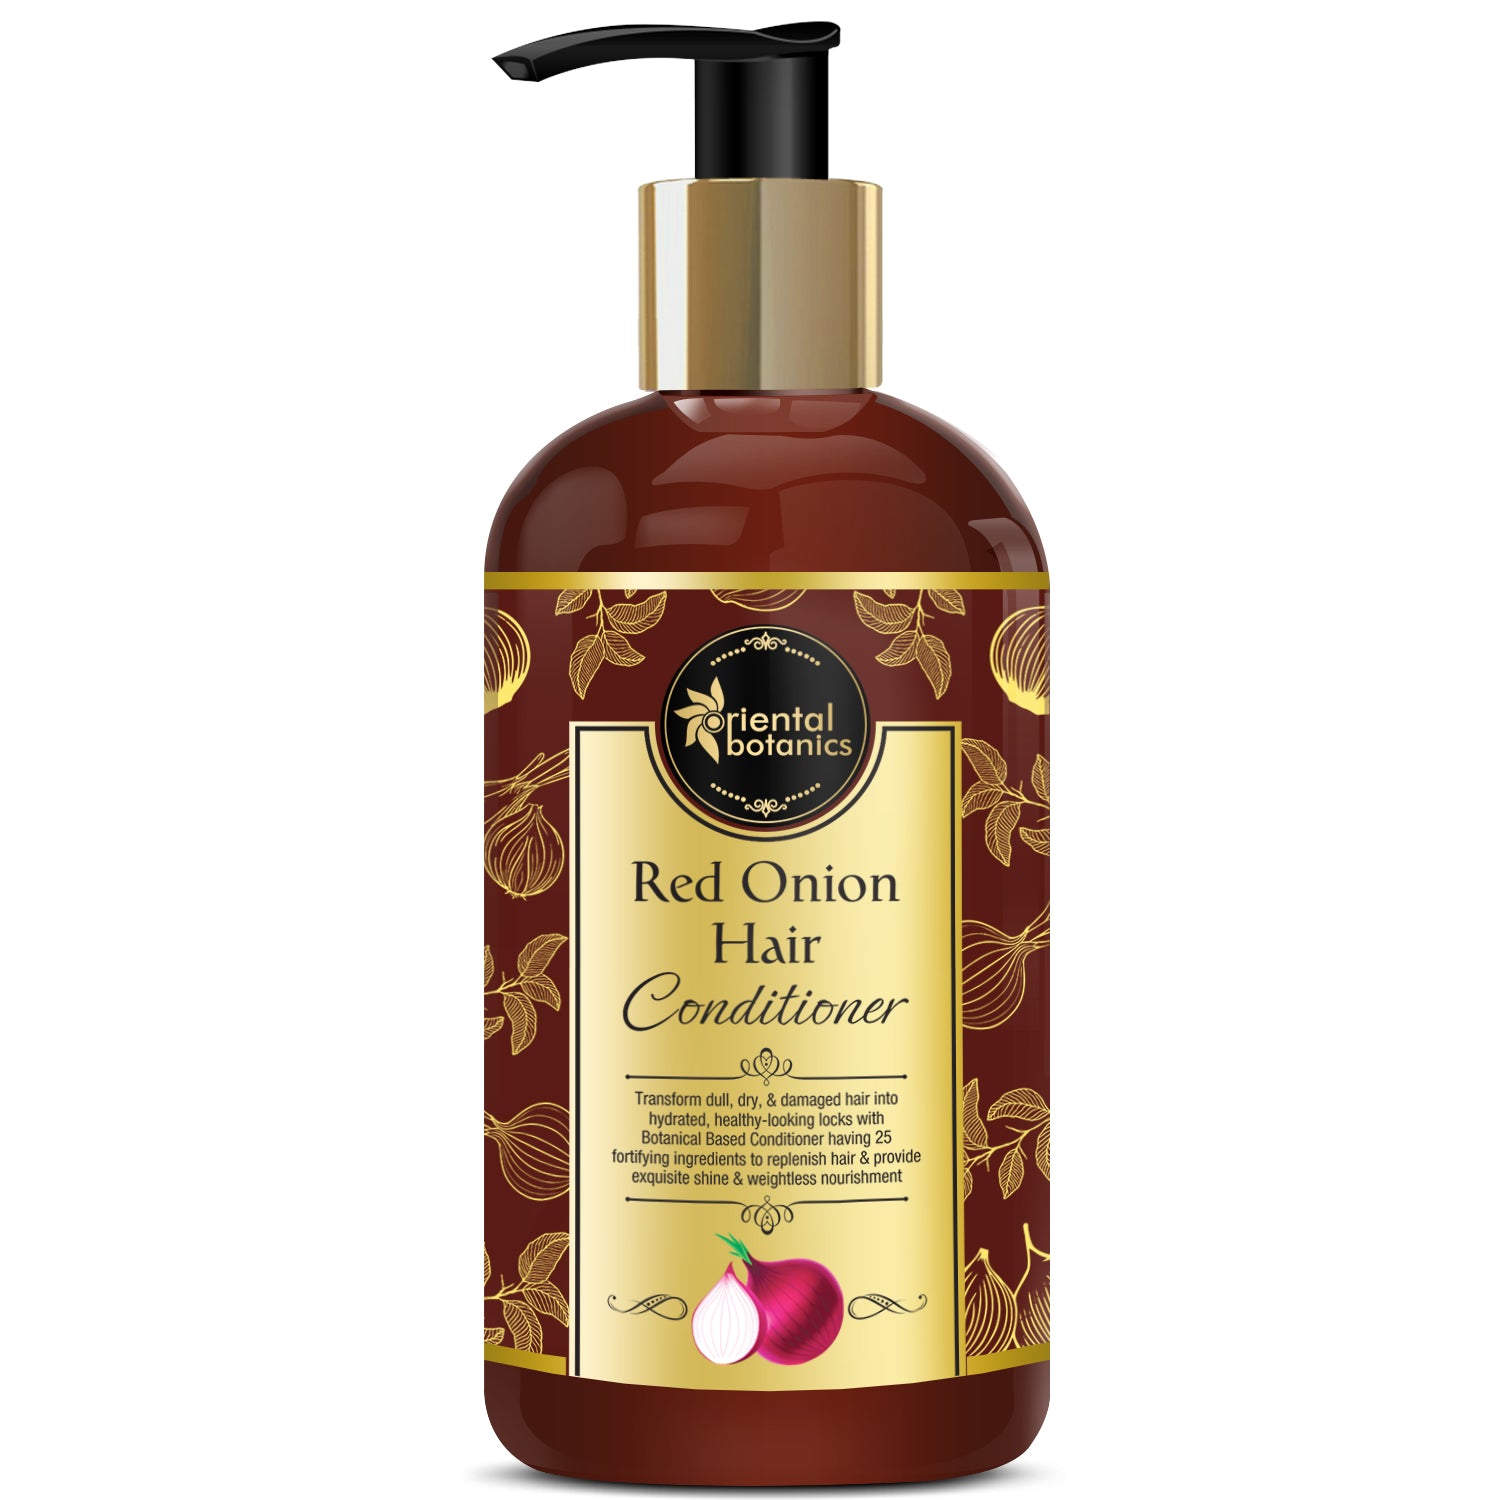 Oriental Botanics Red Onion Hair Conditioner With Red Onion Oil & 25 Botanical Actives - No Parabens, Mineral Oil, Sulphate, 300 ml (ORBOT45)